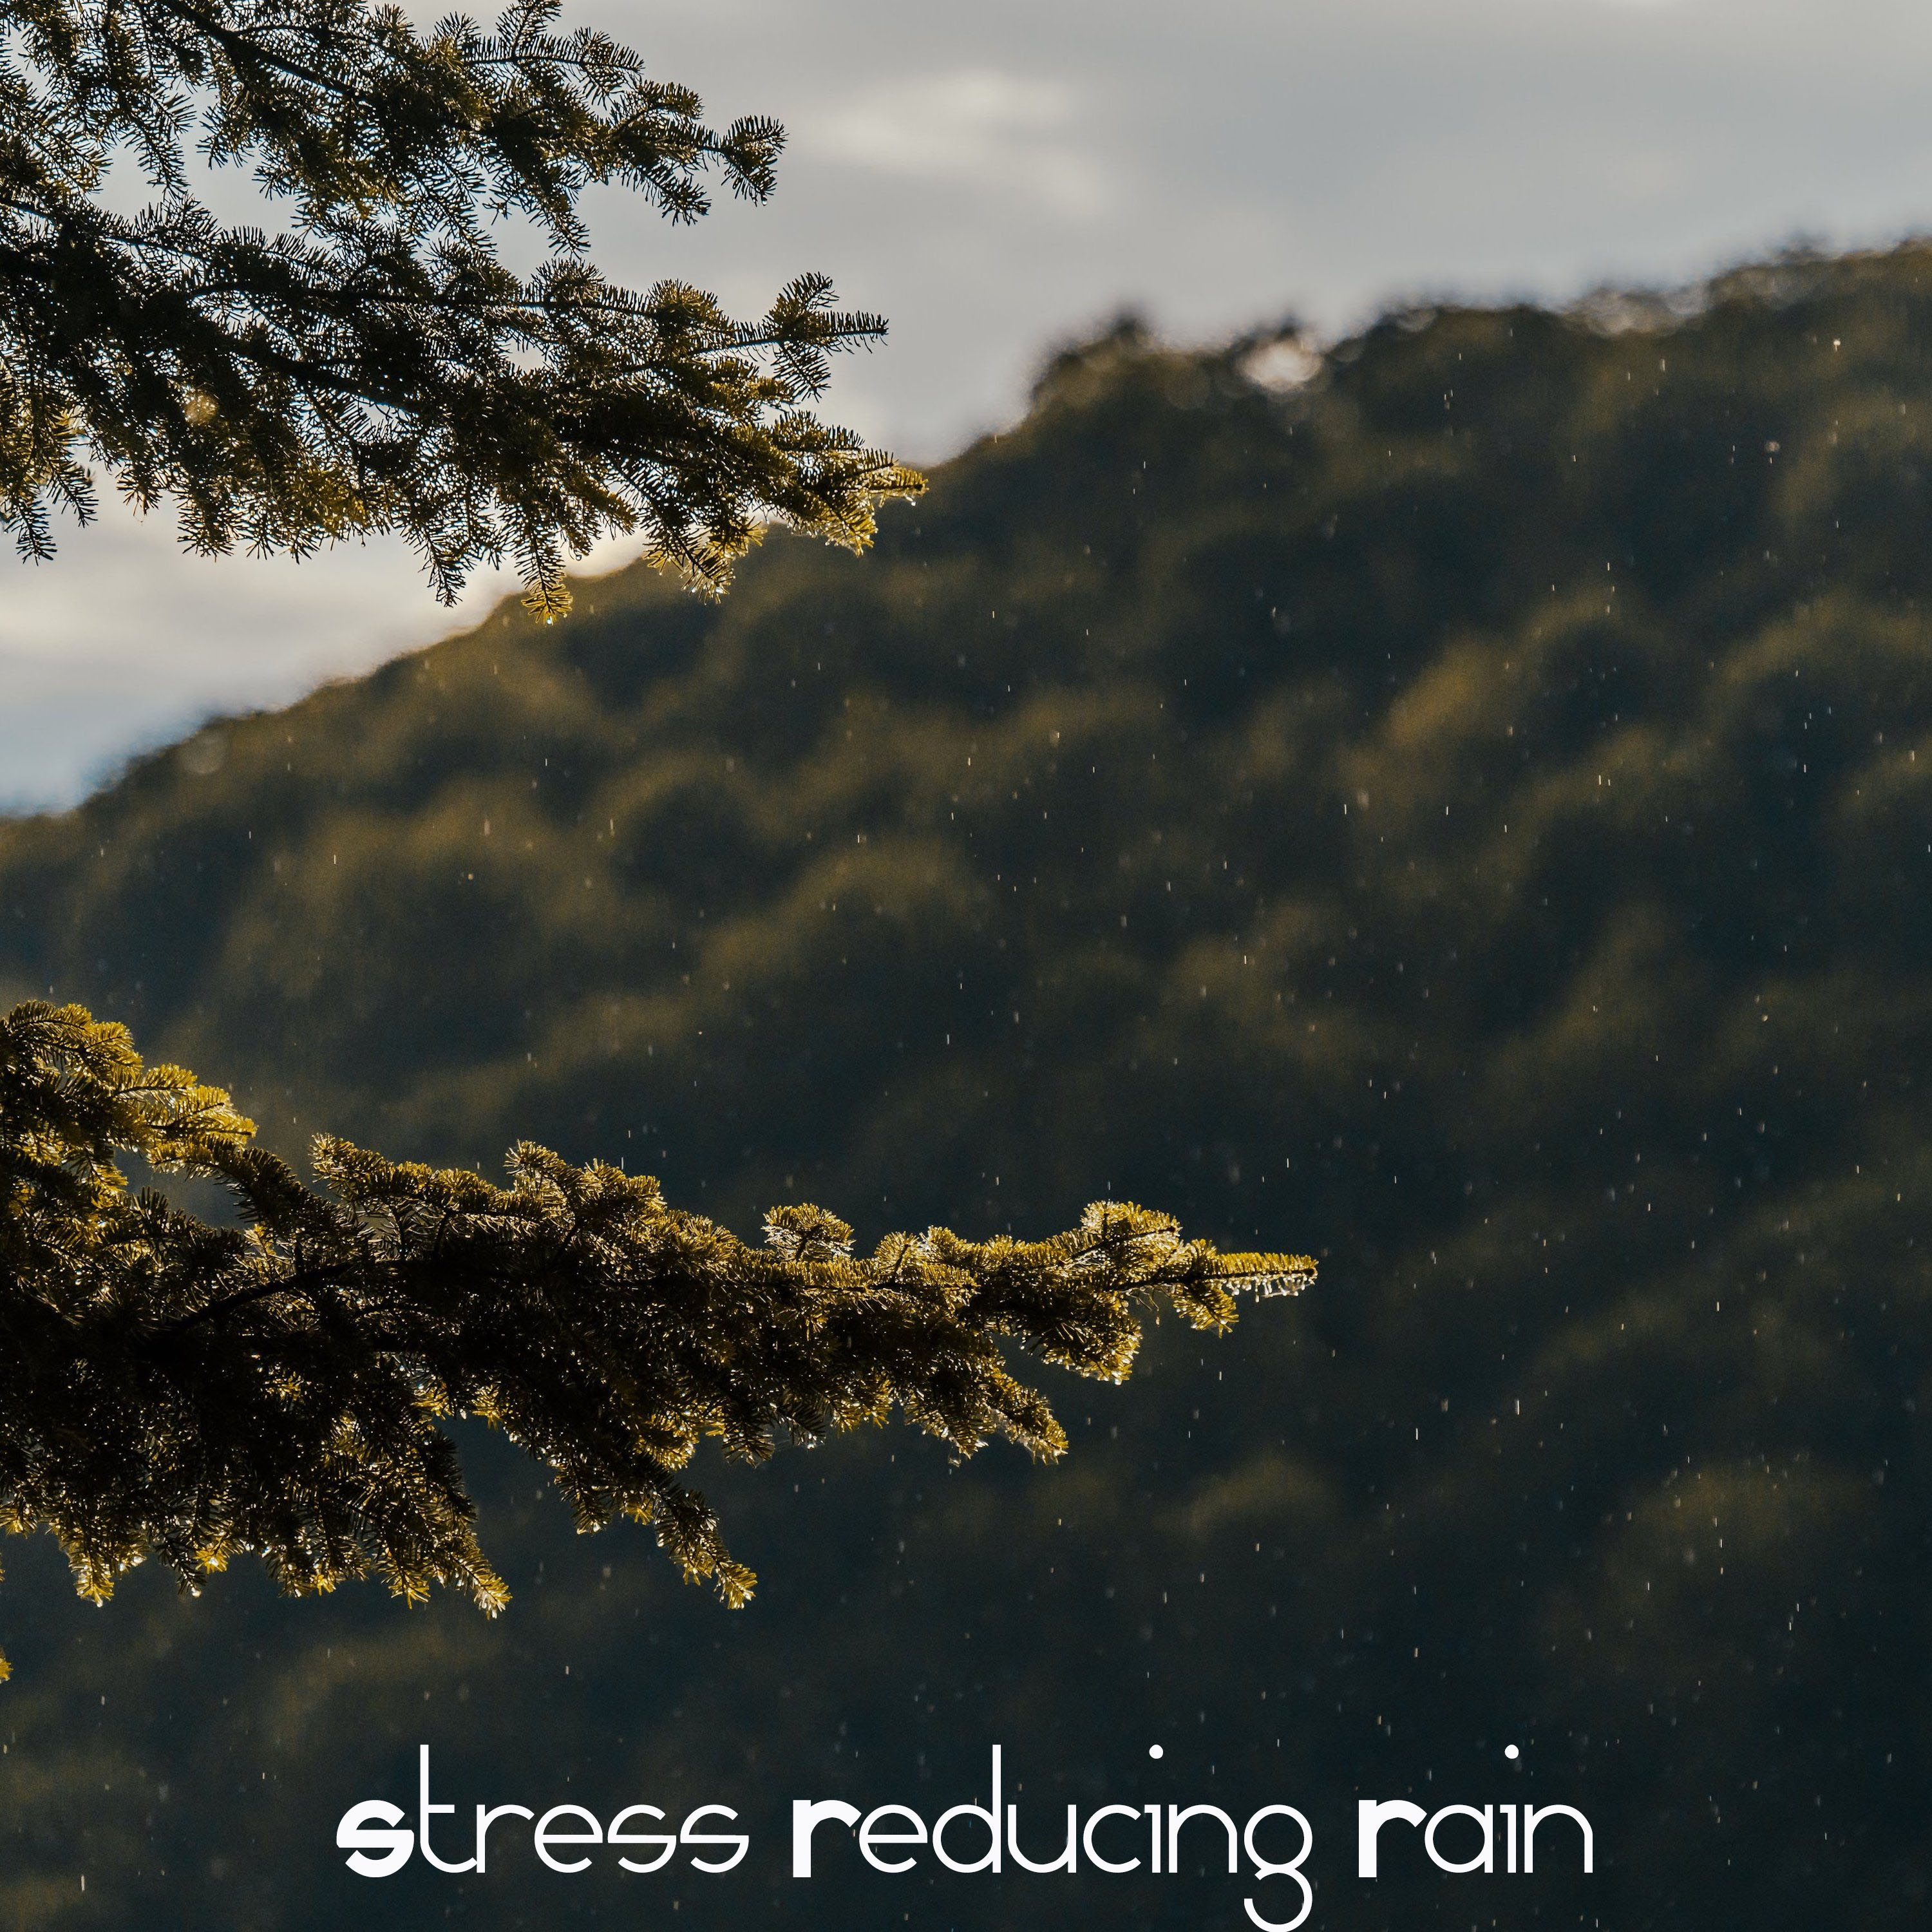 20 Rain Sounds to Relieve Anxiety